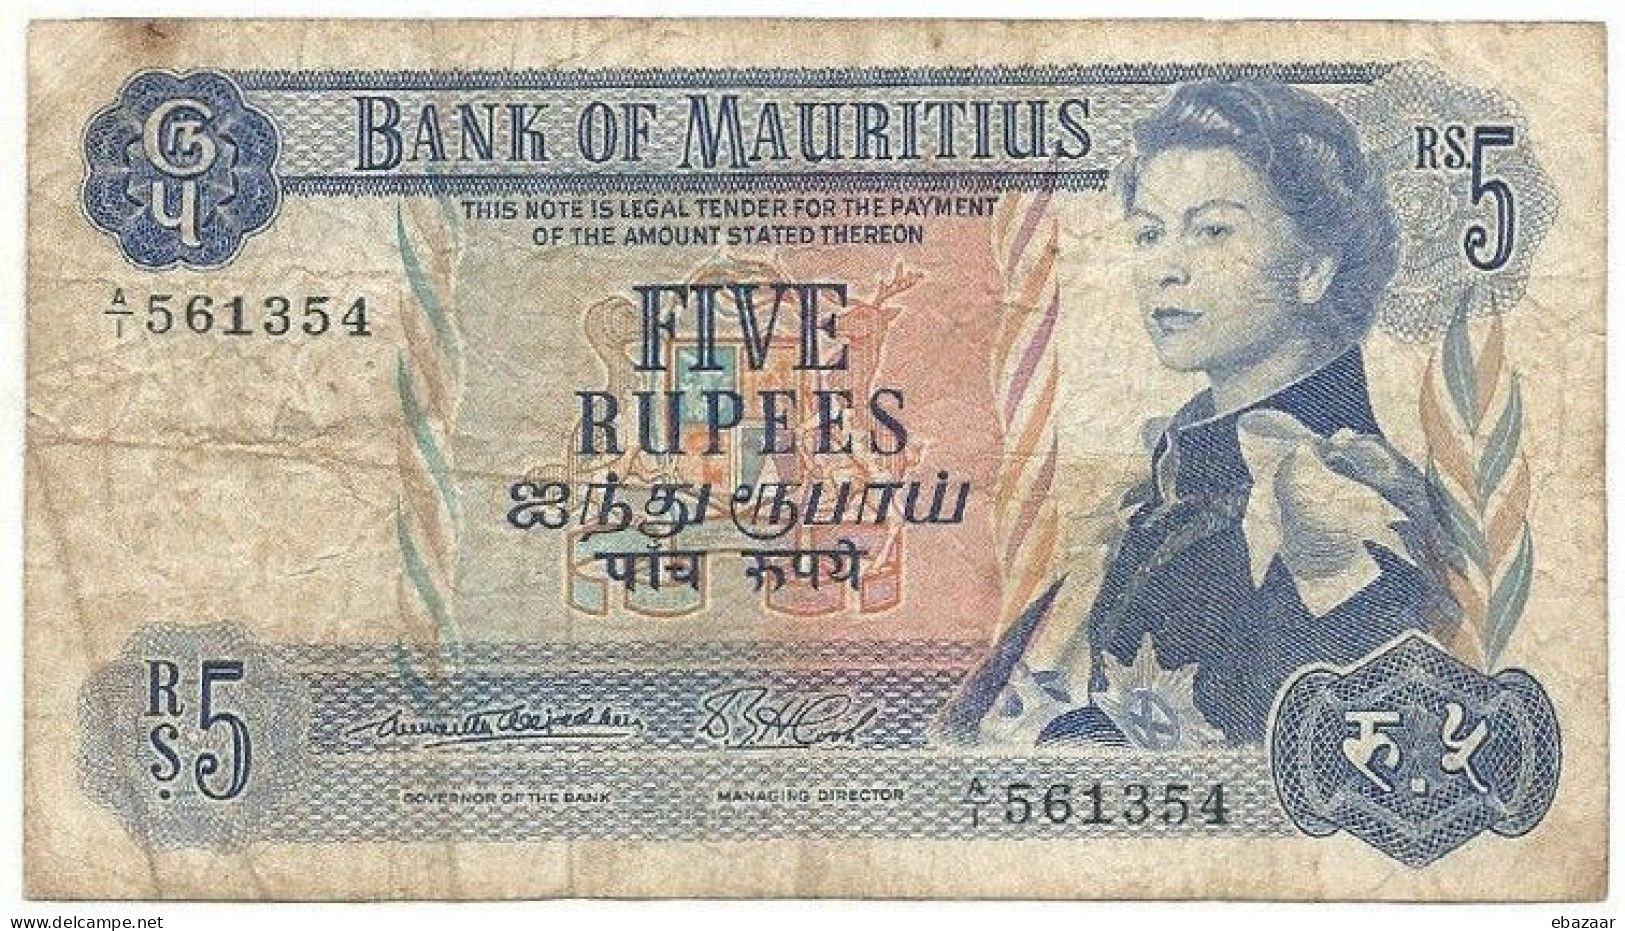 Mauritius 1967 Queen Elizabeth II Five 5 Rupees Banknote P-30a Circulated + FREE GIFT - Maurice